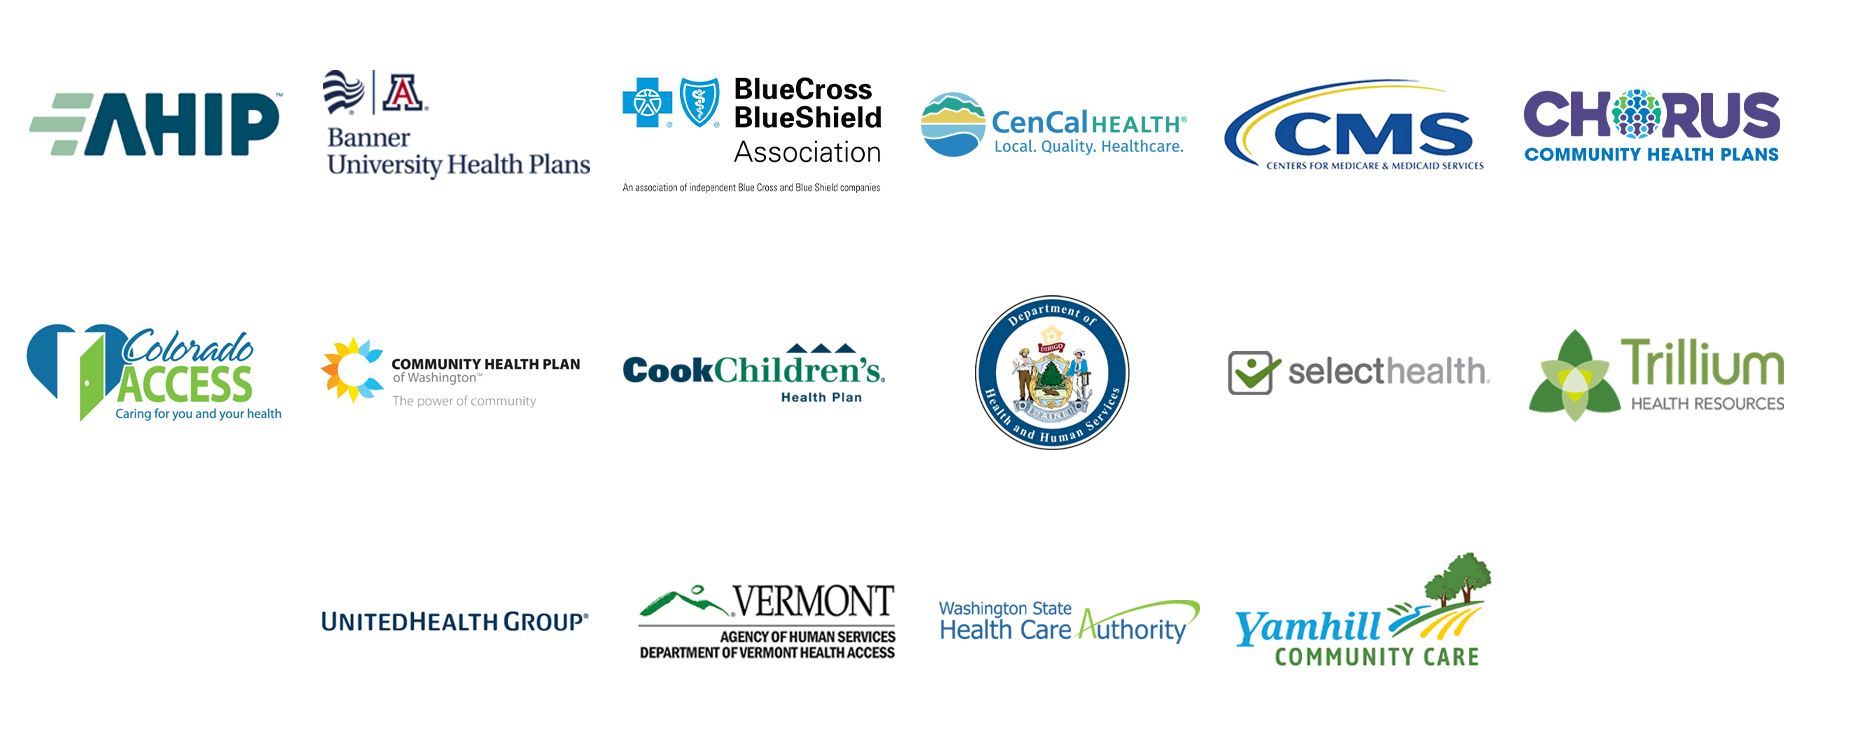 Collage of organization logos including: AHIP, Banner university Health Plans, BlueCross BlueShield Association, CenCal Health, CMS Centers for Medicare and Medicaid Services, CHORUS Community Health Plans, Colorado Access, Community Health Plan of Washington, Cook Children's Health Plan, Department of Health and Human Services, Select Health, Trillium, UnitedHealth Group, Vermont Agency of Human Services Department of Vermont Health Access, Washington State Health Care Authority, Yamhill Community Care